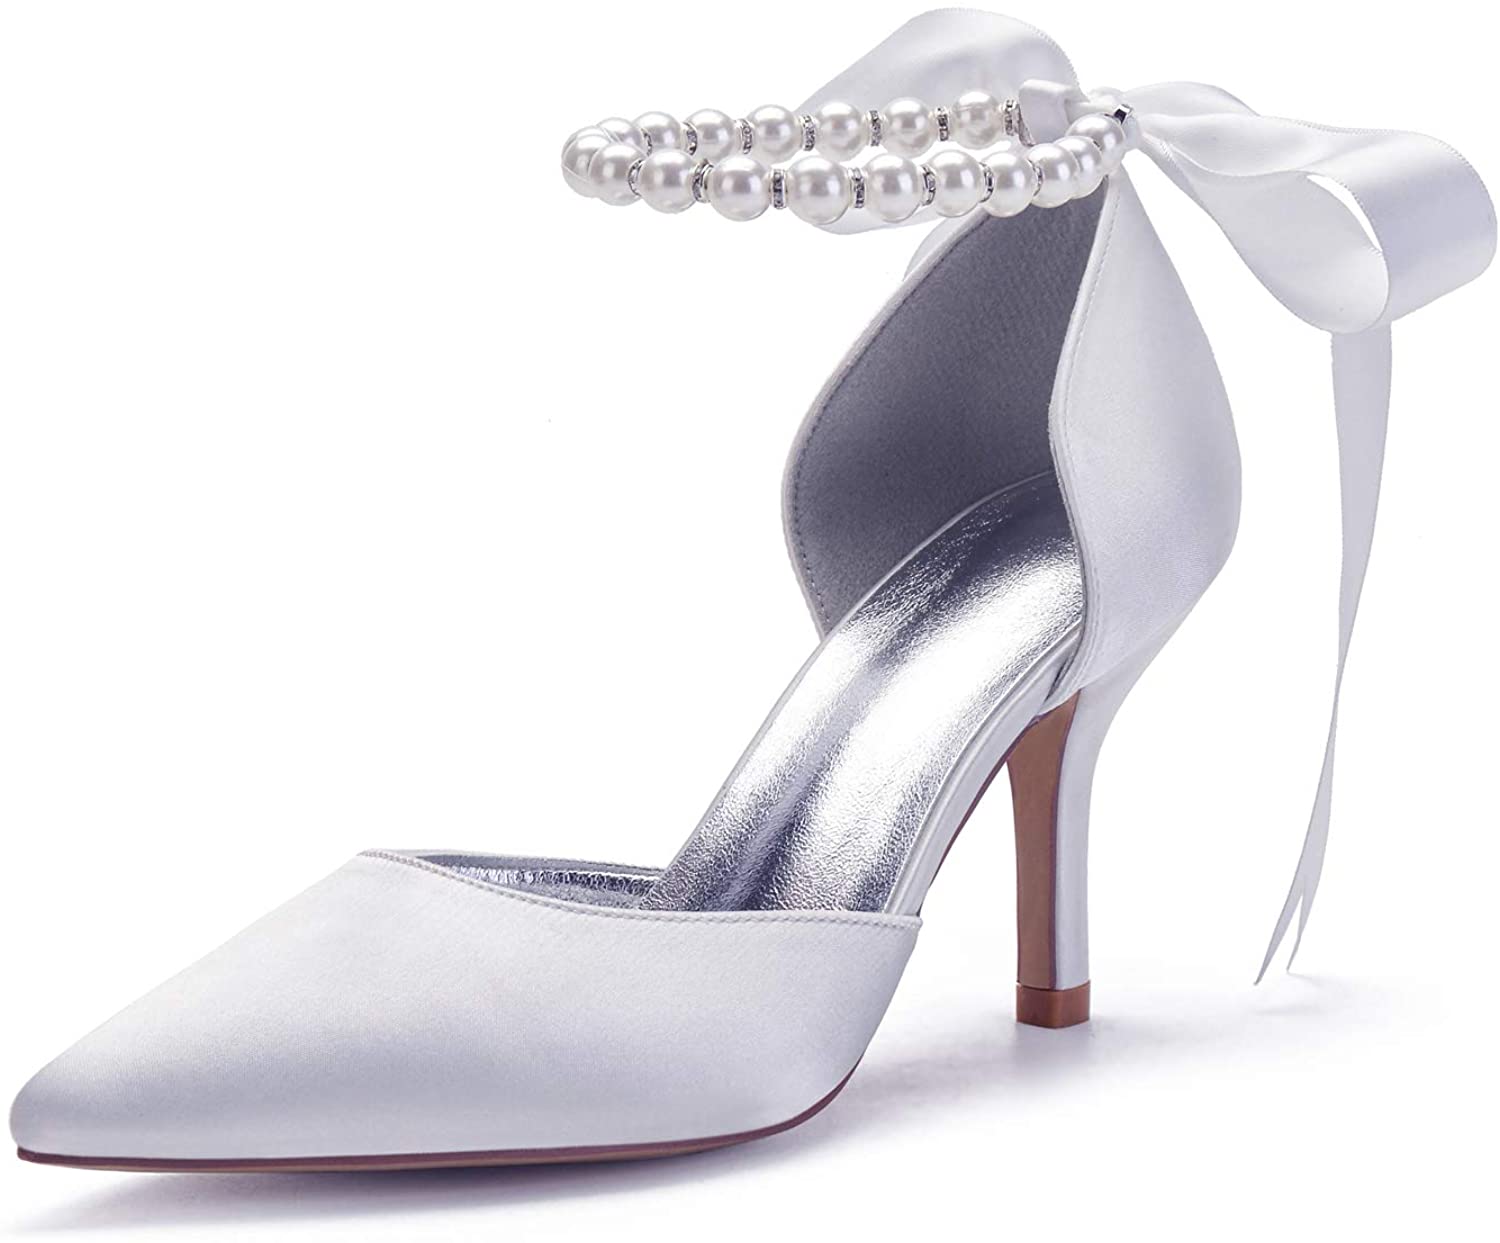 Most Comfortable Bridal Shoes with Bow: Anna’s Bridal Pearl White Wedding Shoes